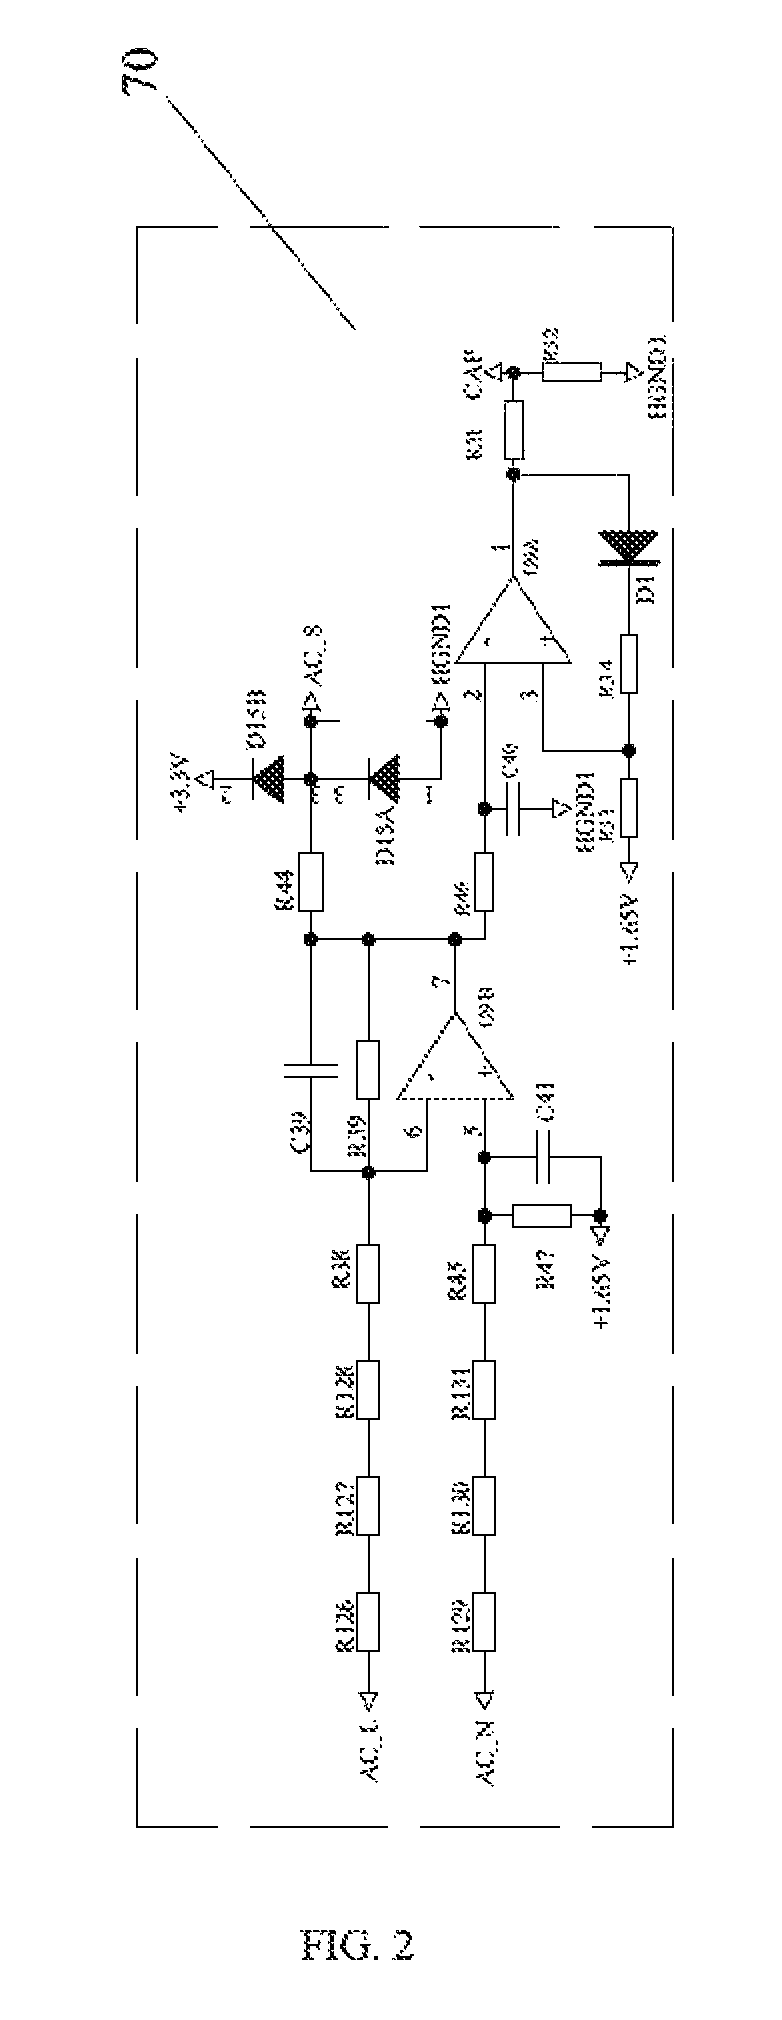 Voltage converter without electrolytic capacitor